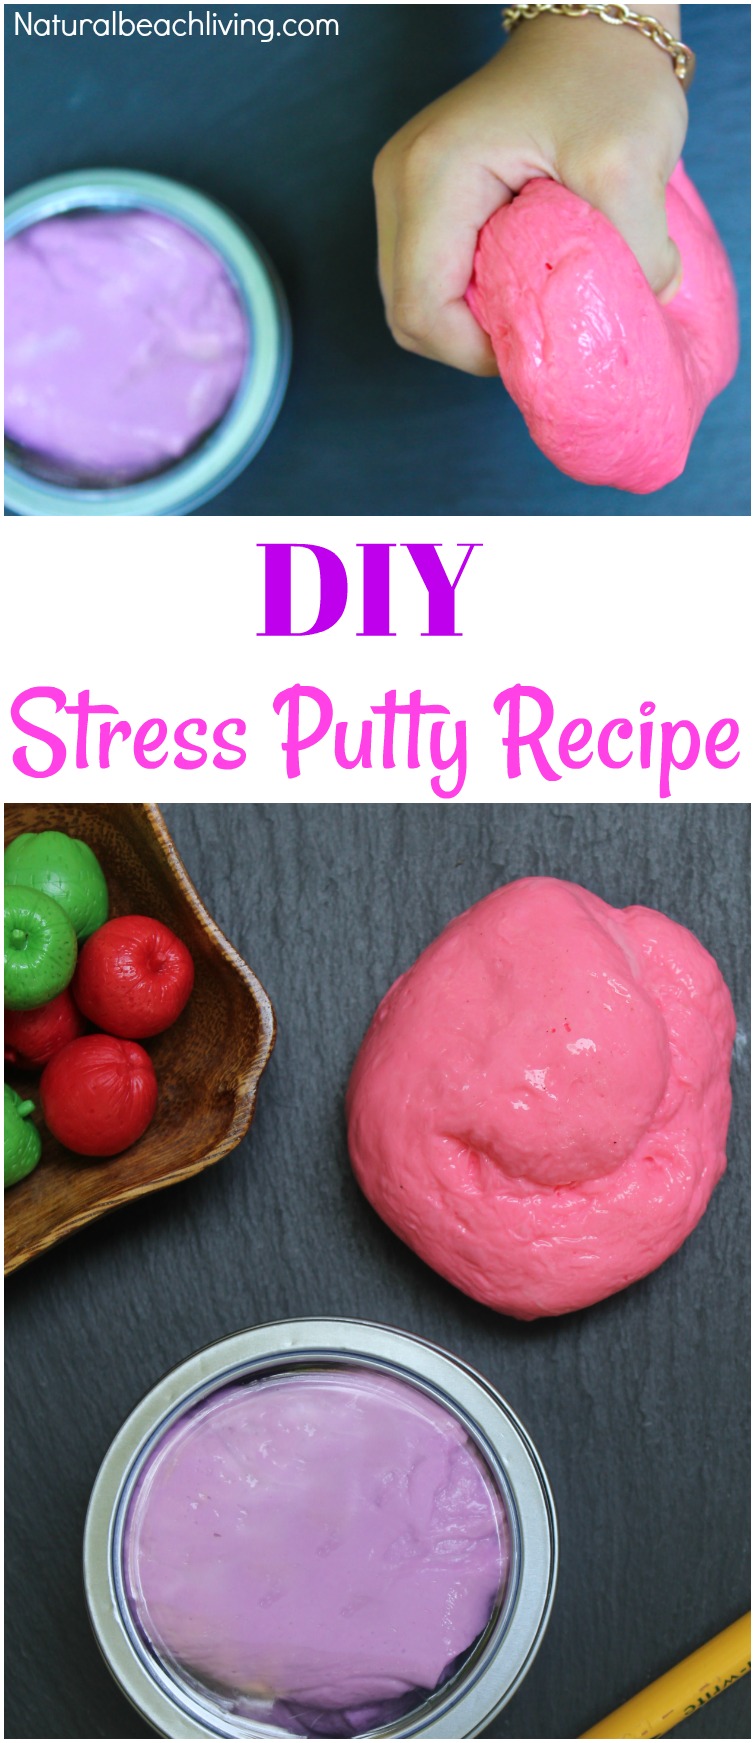 The Best Thinking Putty Recipe You'll Ever Make, Thinking Putty, DIY Thinking Putty, Silly Putty Recipe, Homemade Stress Putty, Therapy Dough, Sensory Play